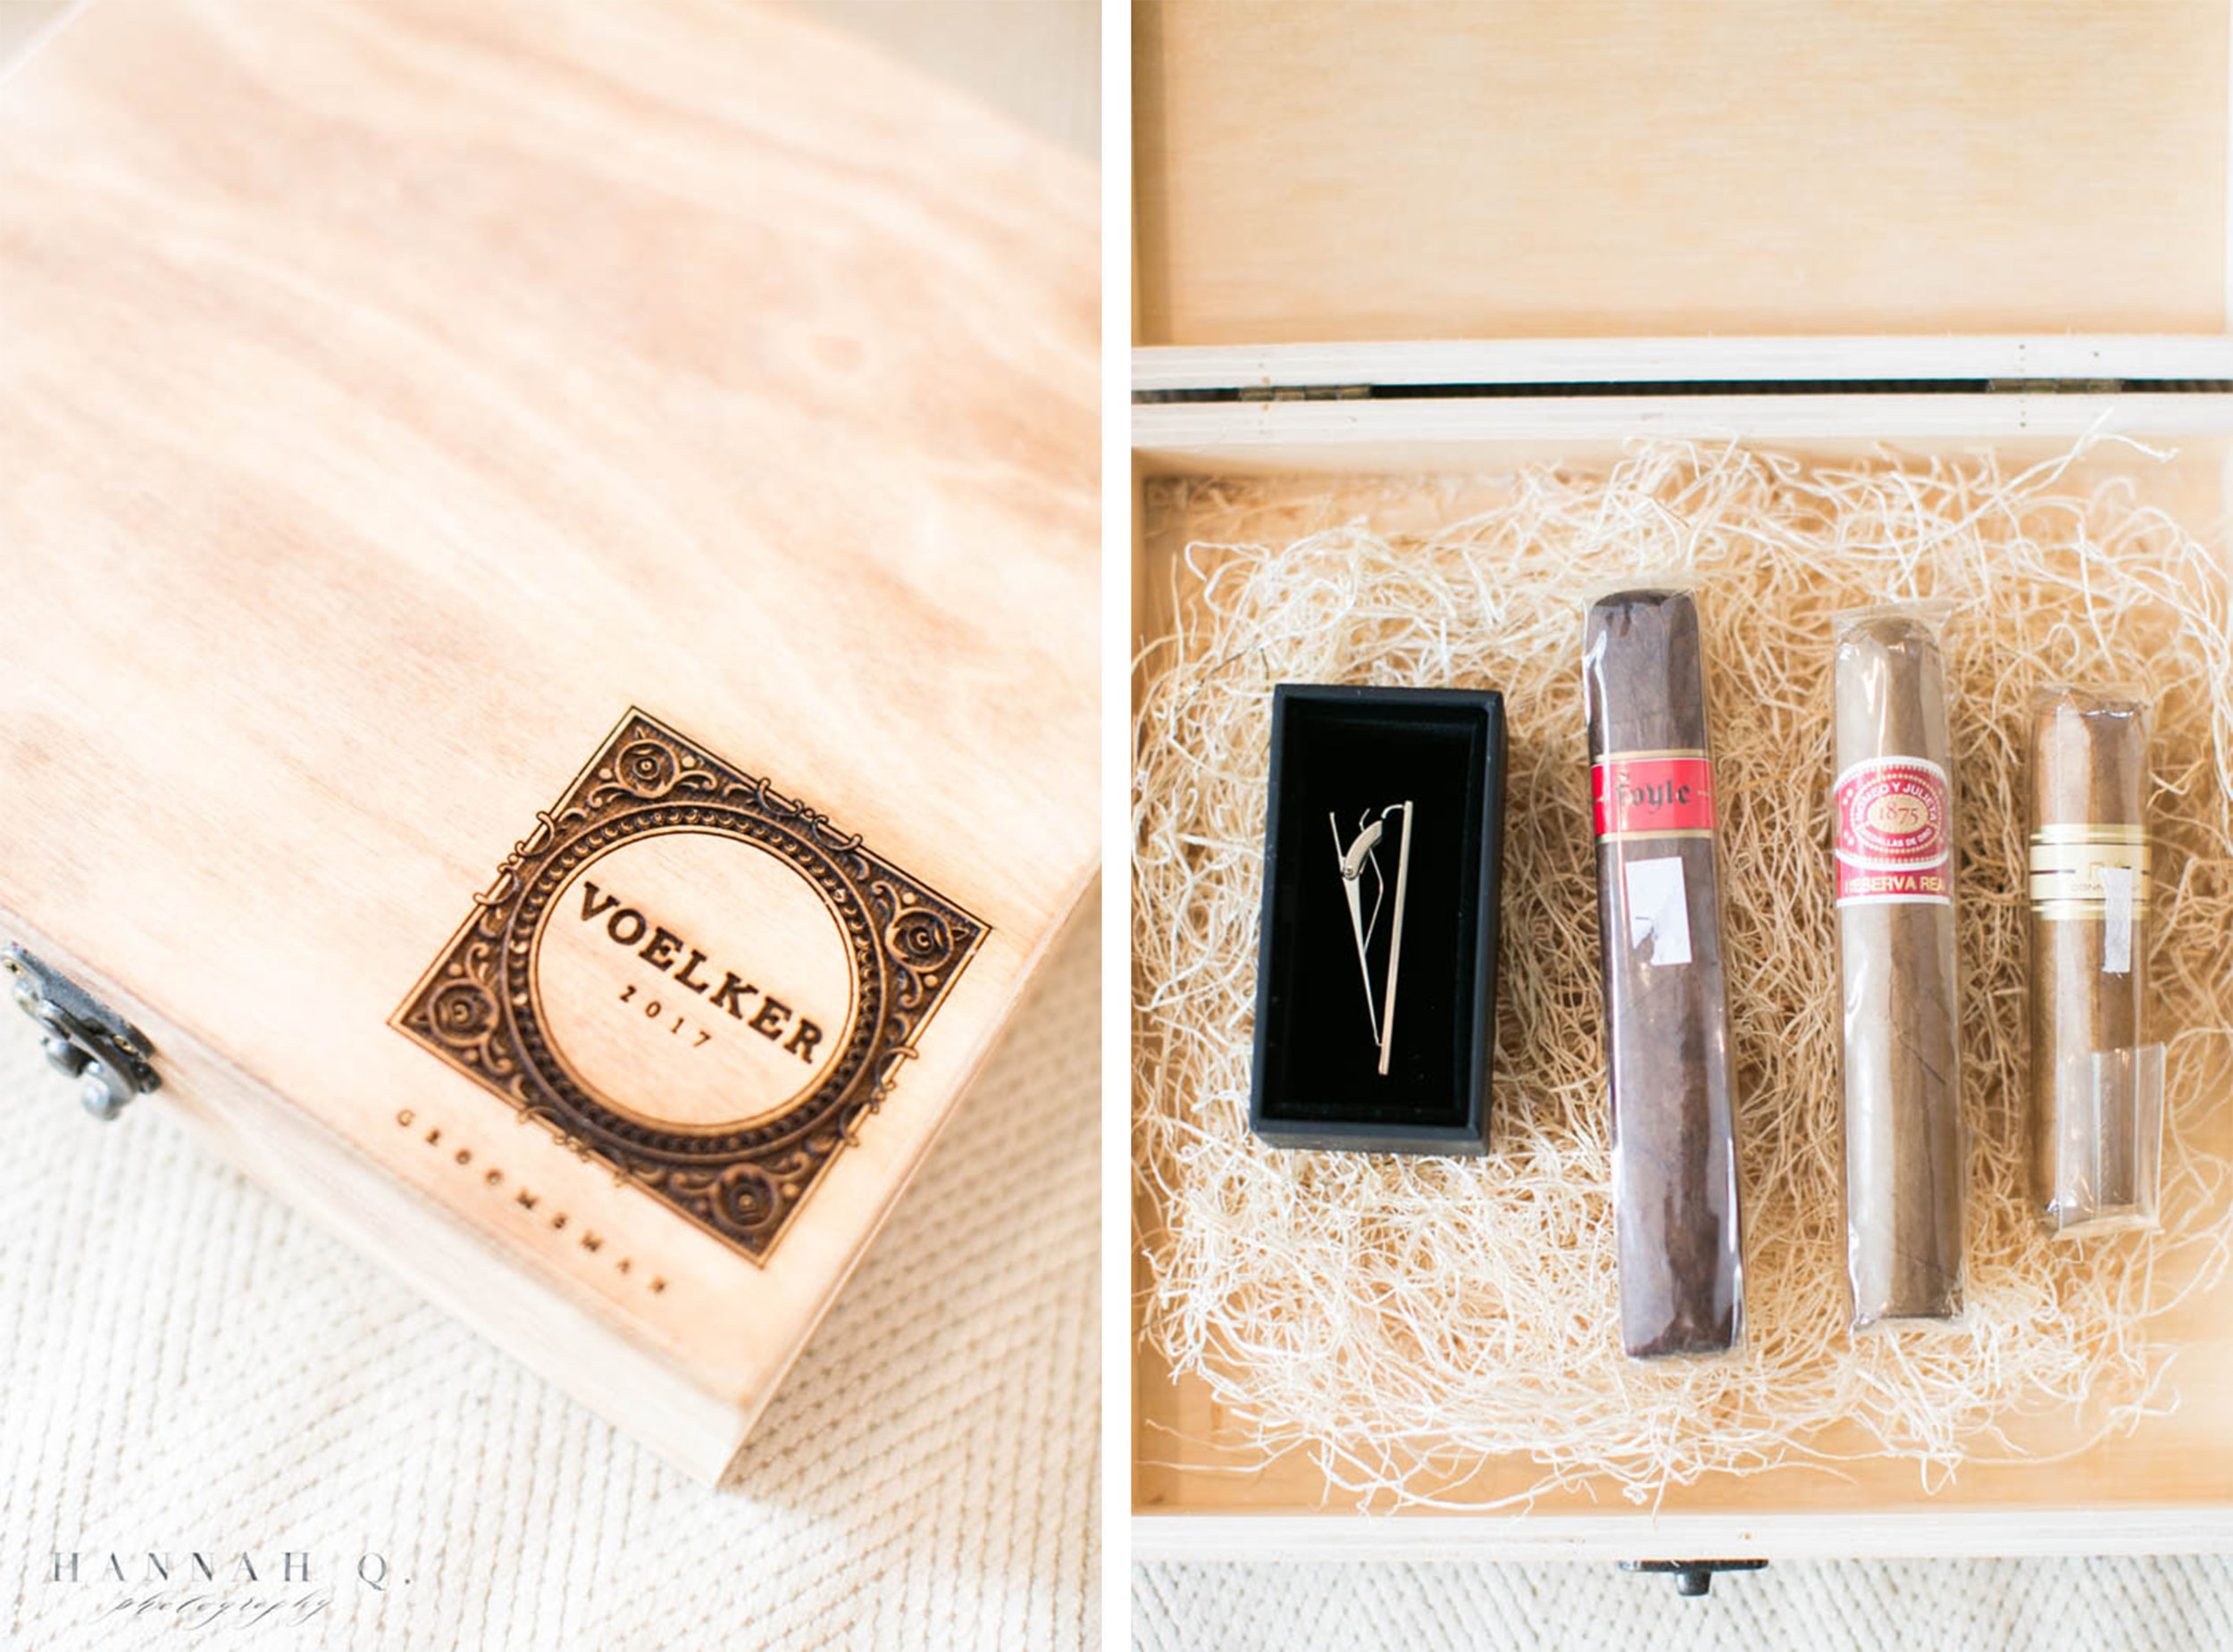 In classic Bruce-style, he gifted his groomsmen with these fancy cigars.